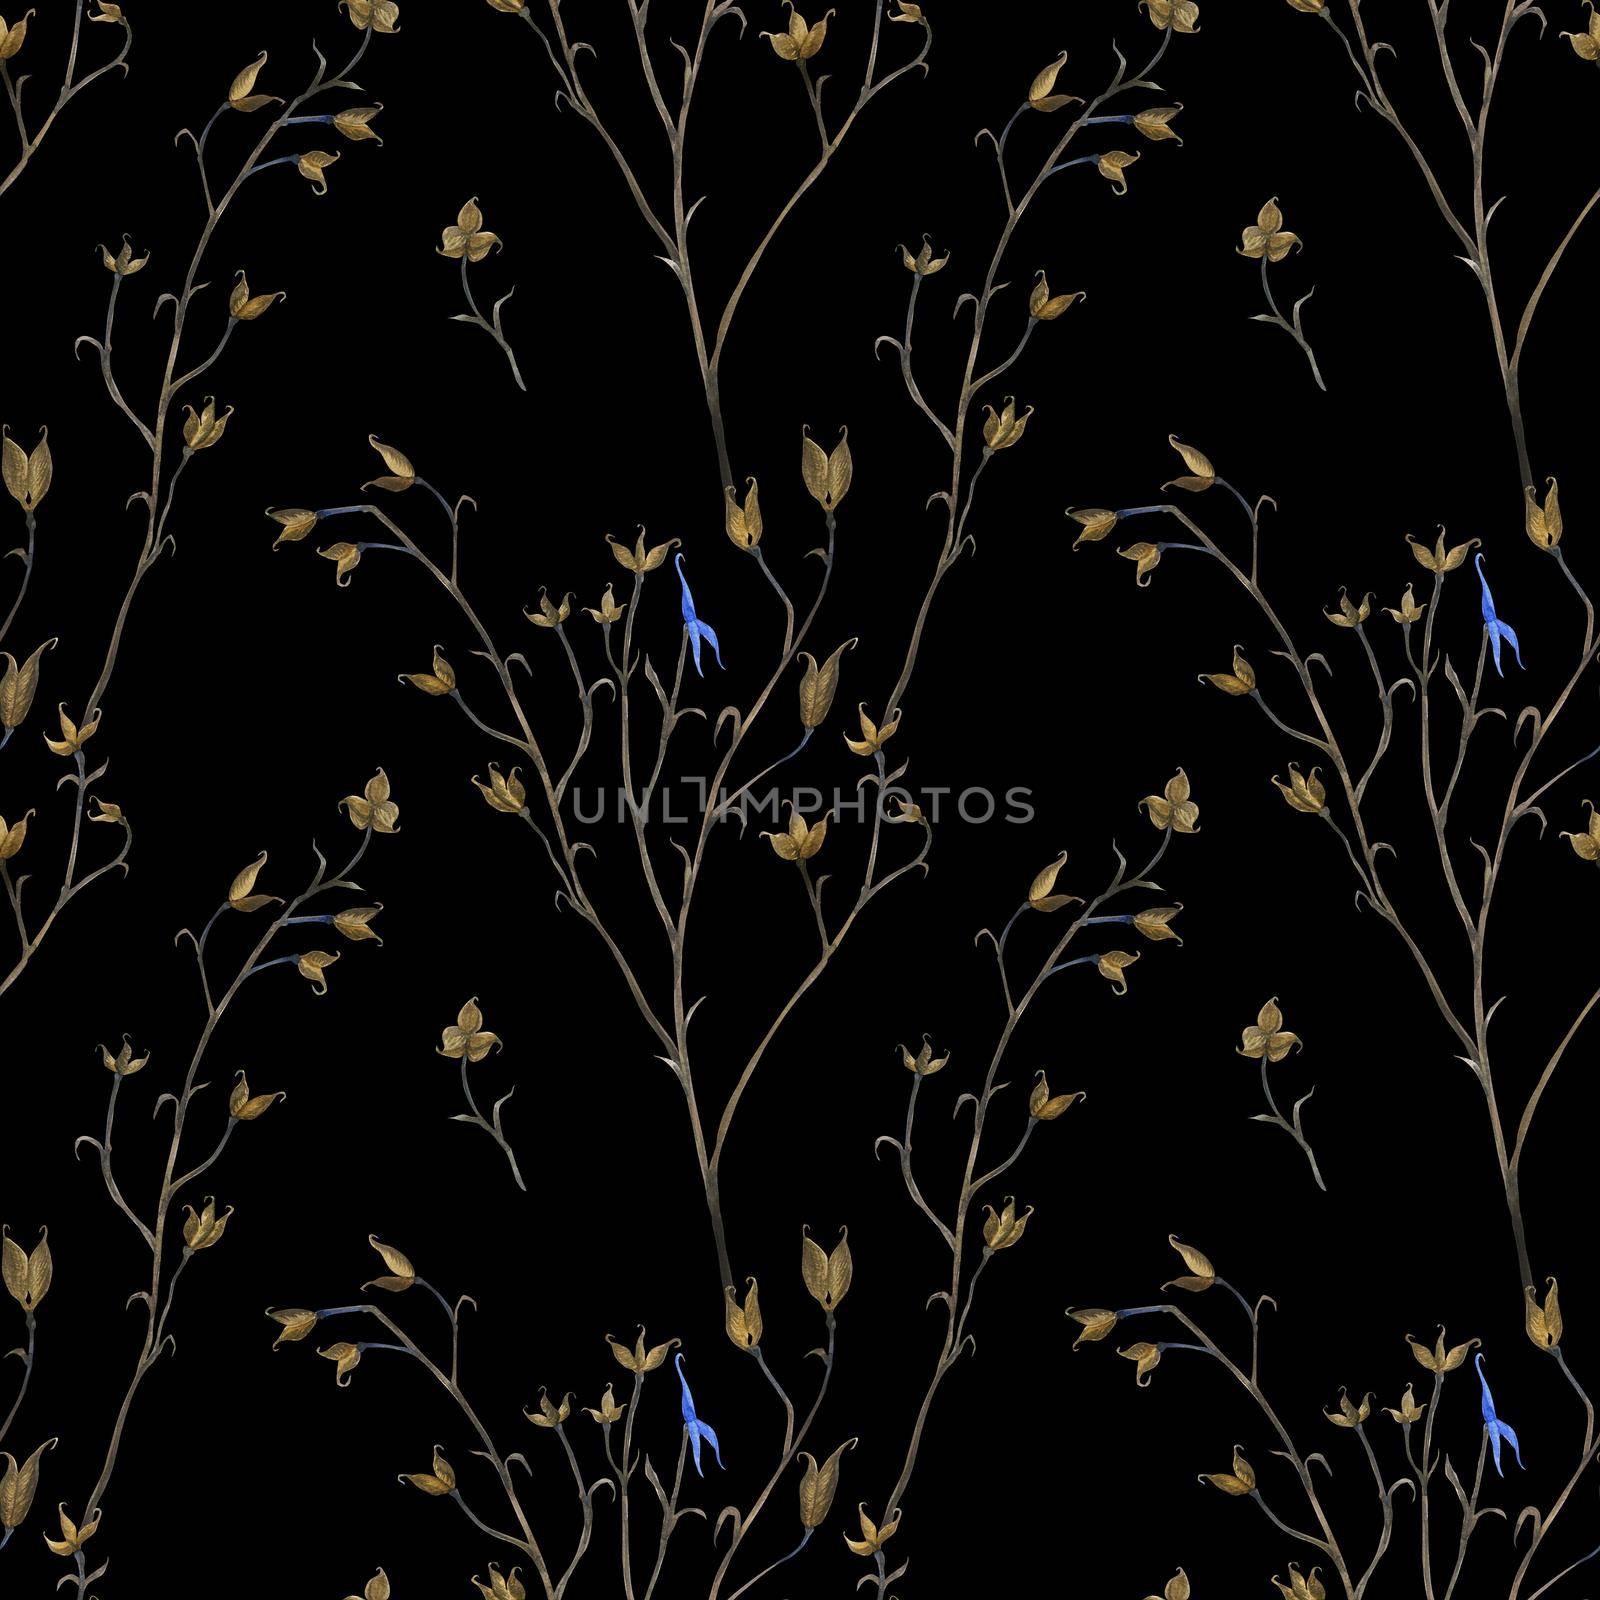 Watercolor seamless pattern Aconitum plant aka Wolfsbane plant. Realistic style, black background, path included